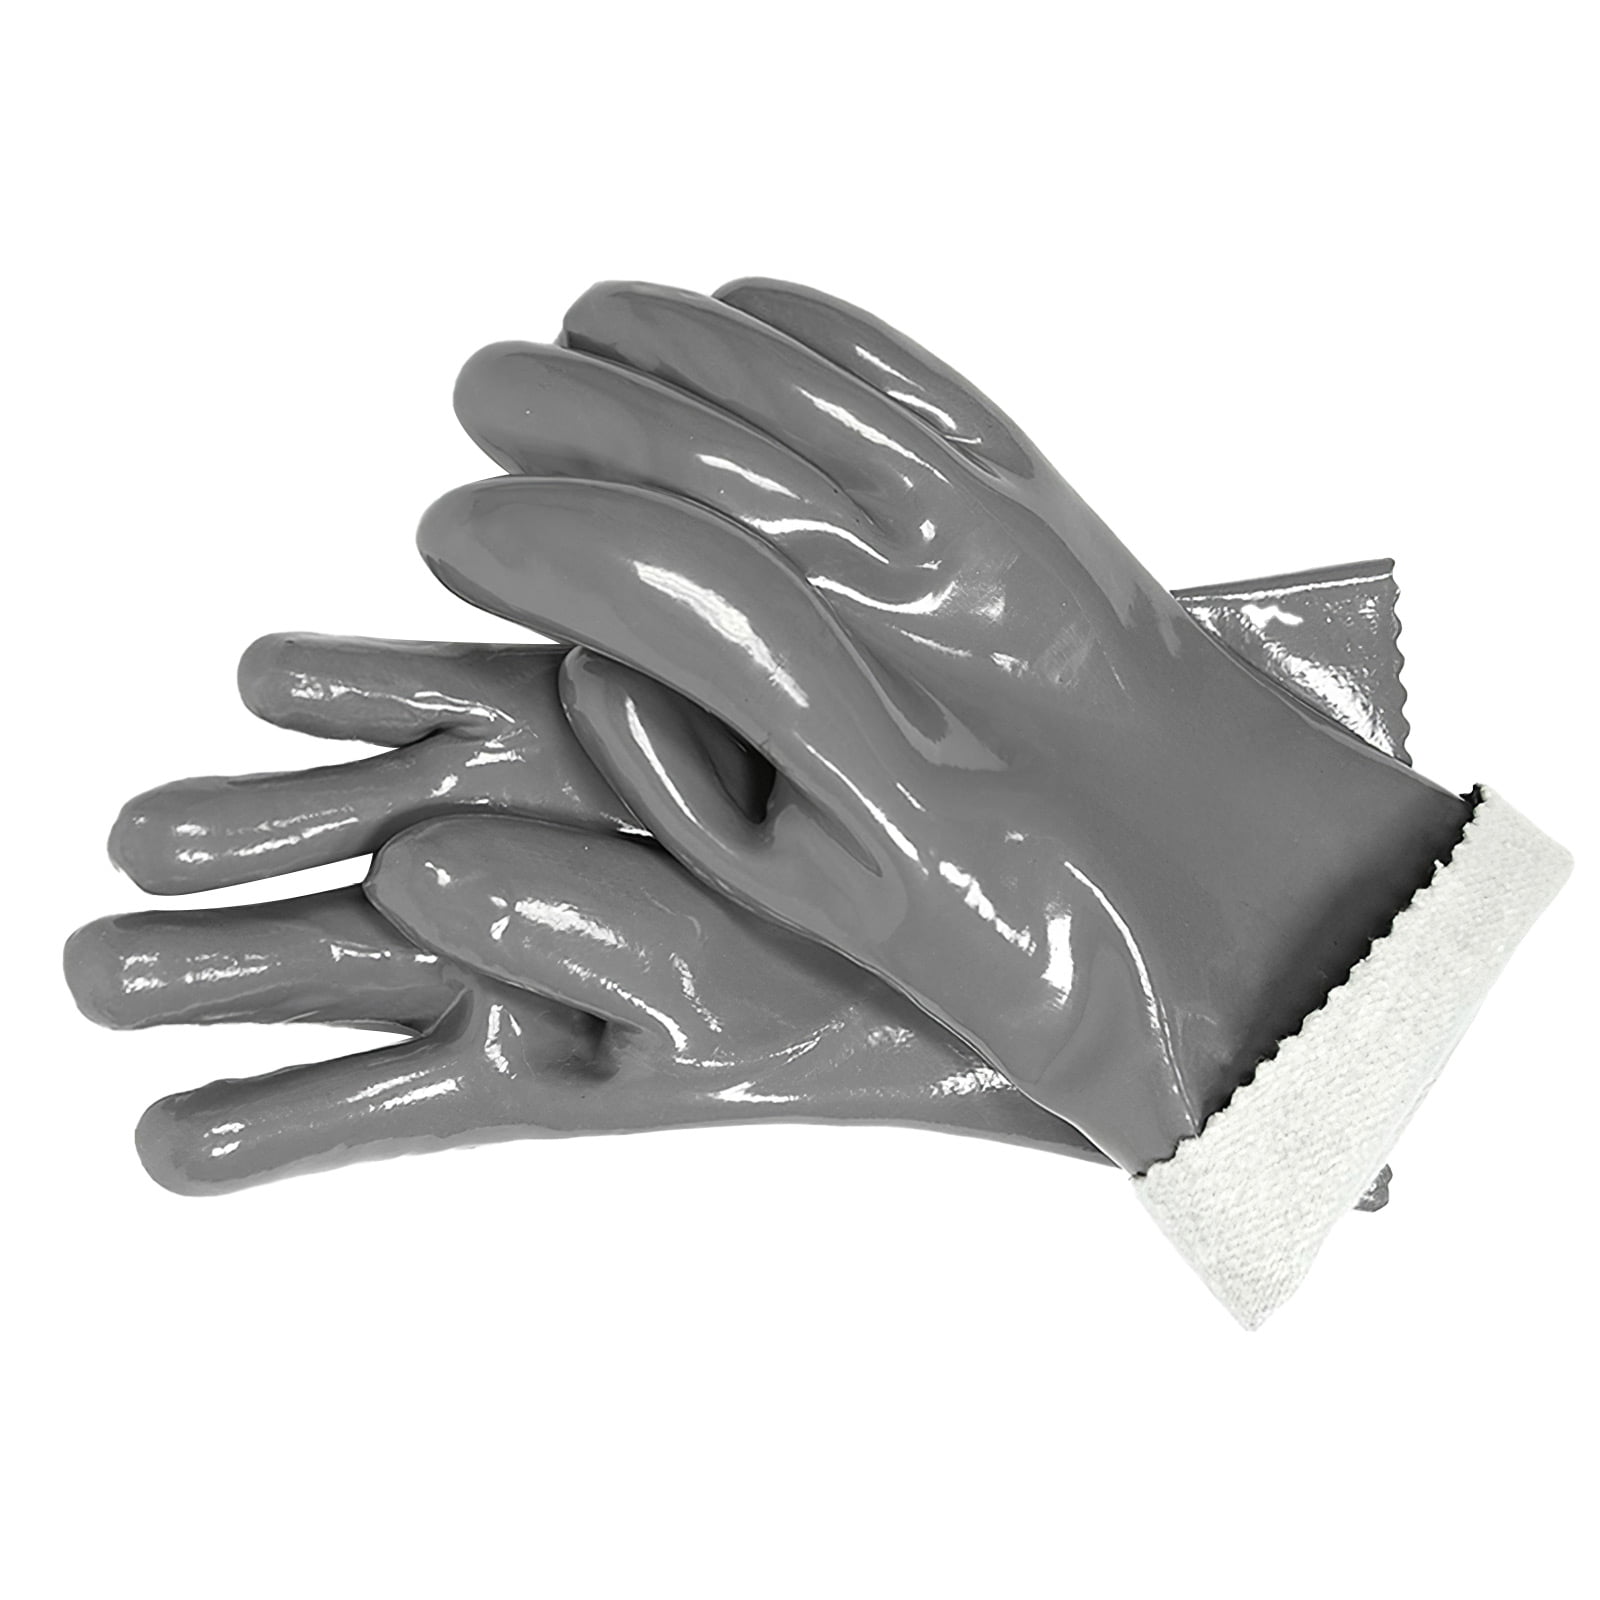 Heat Resistant Gloves for BBQ Baking Welding or Handling Super Hot Items In the Kitchen or Outdoors Dr.HeiZ 1 Pair Oven Barbecue Long Fingers Gloves Cooking 